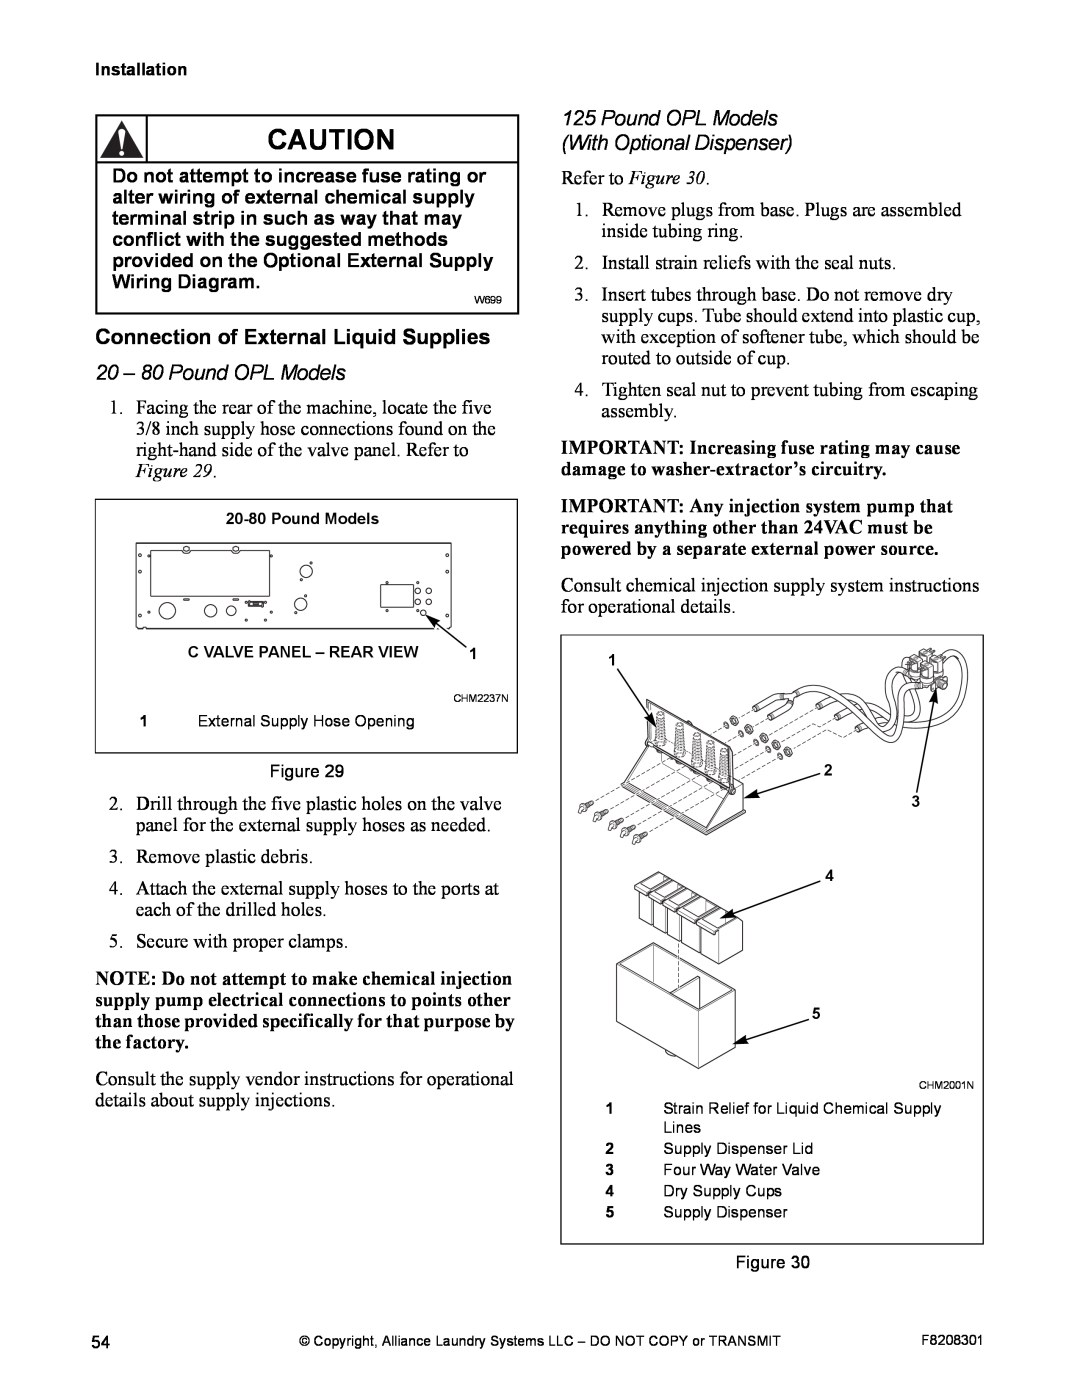 Alliance Laundry Systems CHM1772C manual Connection of External Liquid Supplies, 20 - 80 Pound OPL Models 